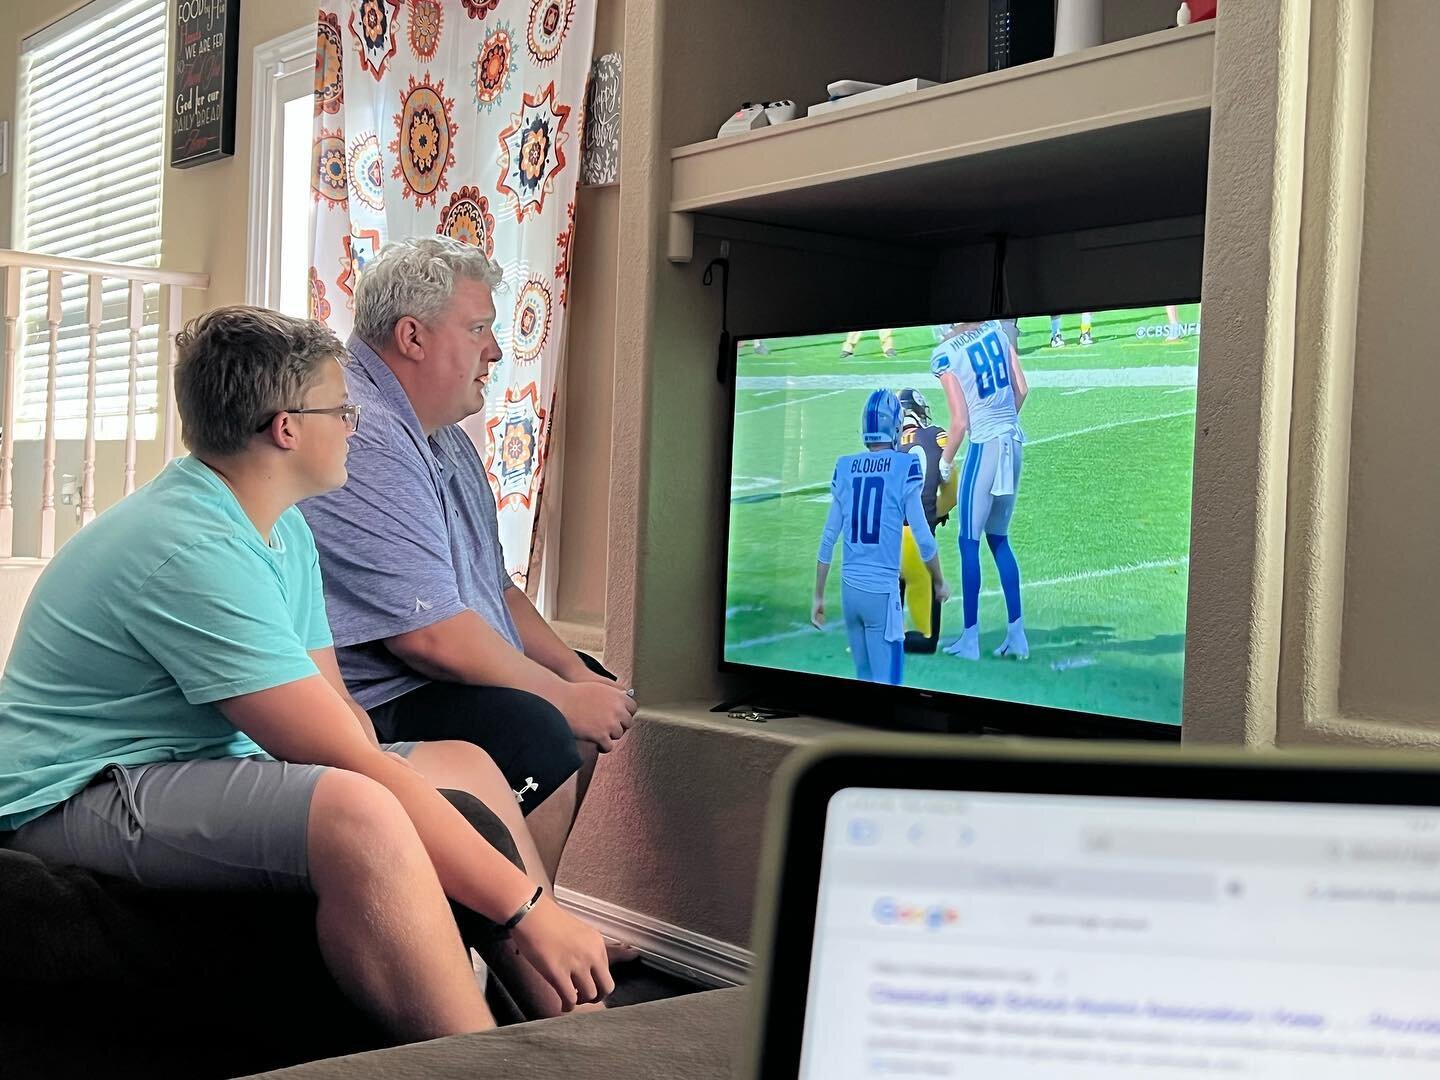 I&rsquo;m doing research for work and the boys are studying football. Maverick has his first tackle game this Wednesday so they are all business right now. Makes me happy that Mav loves it so much and that he gets to have his dad as his coach 💙